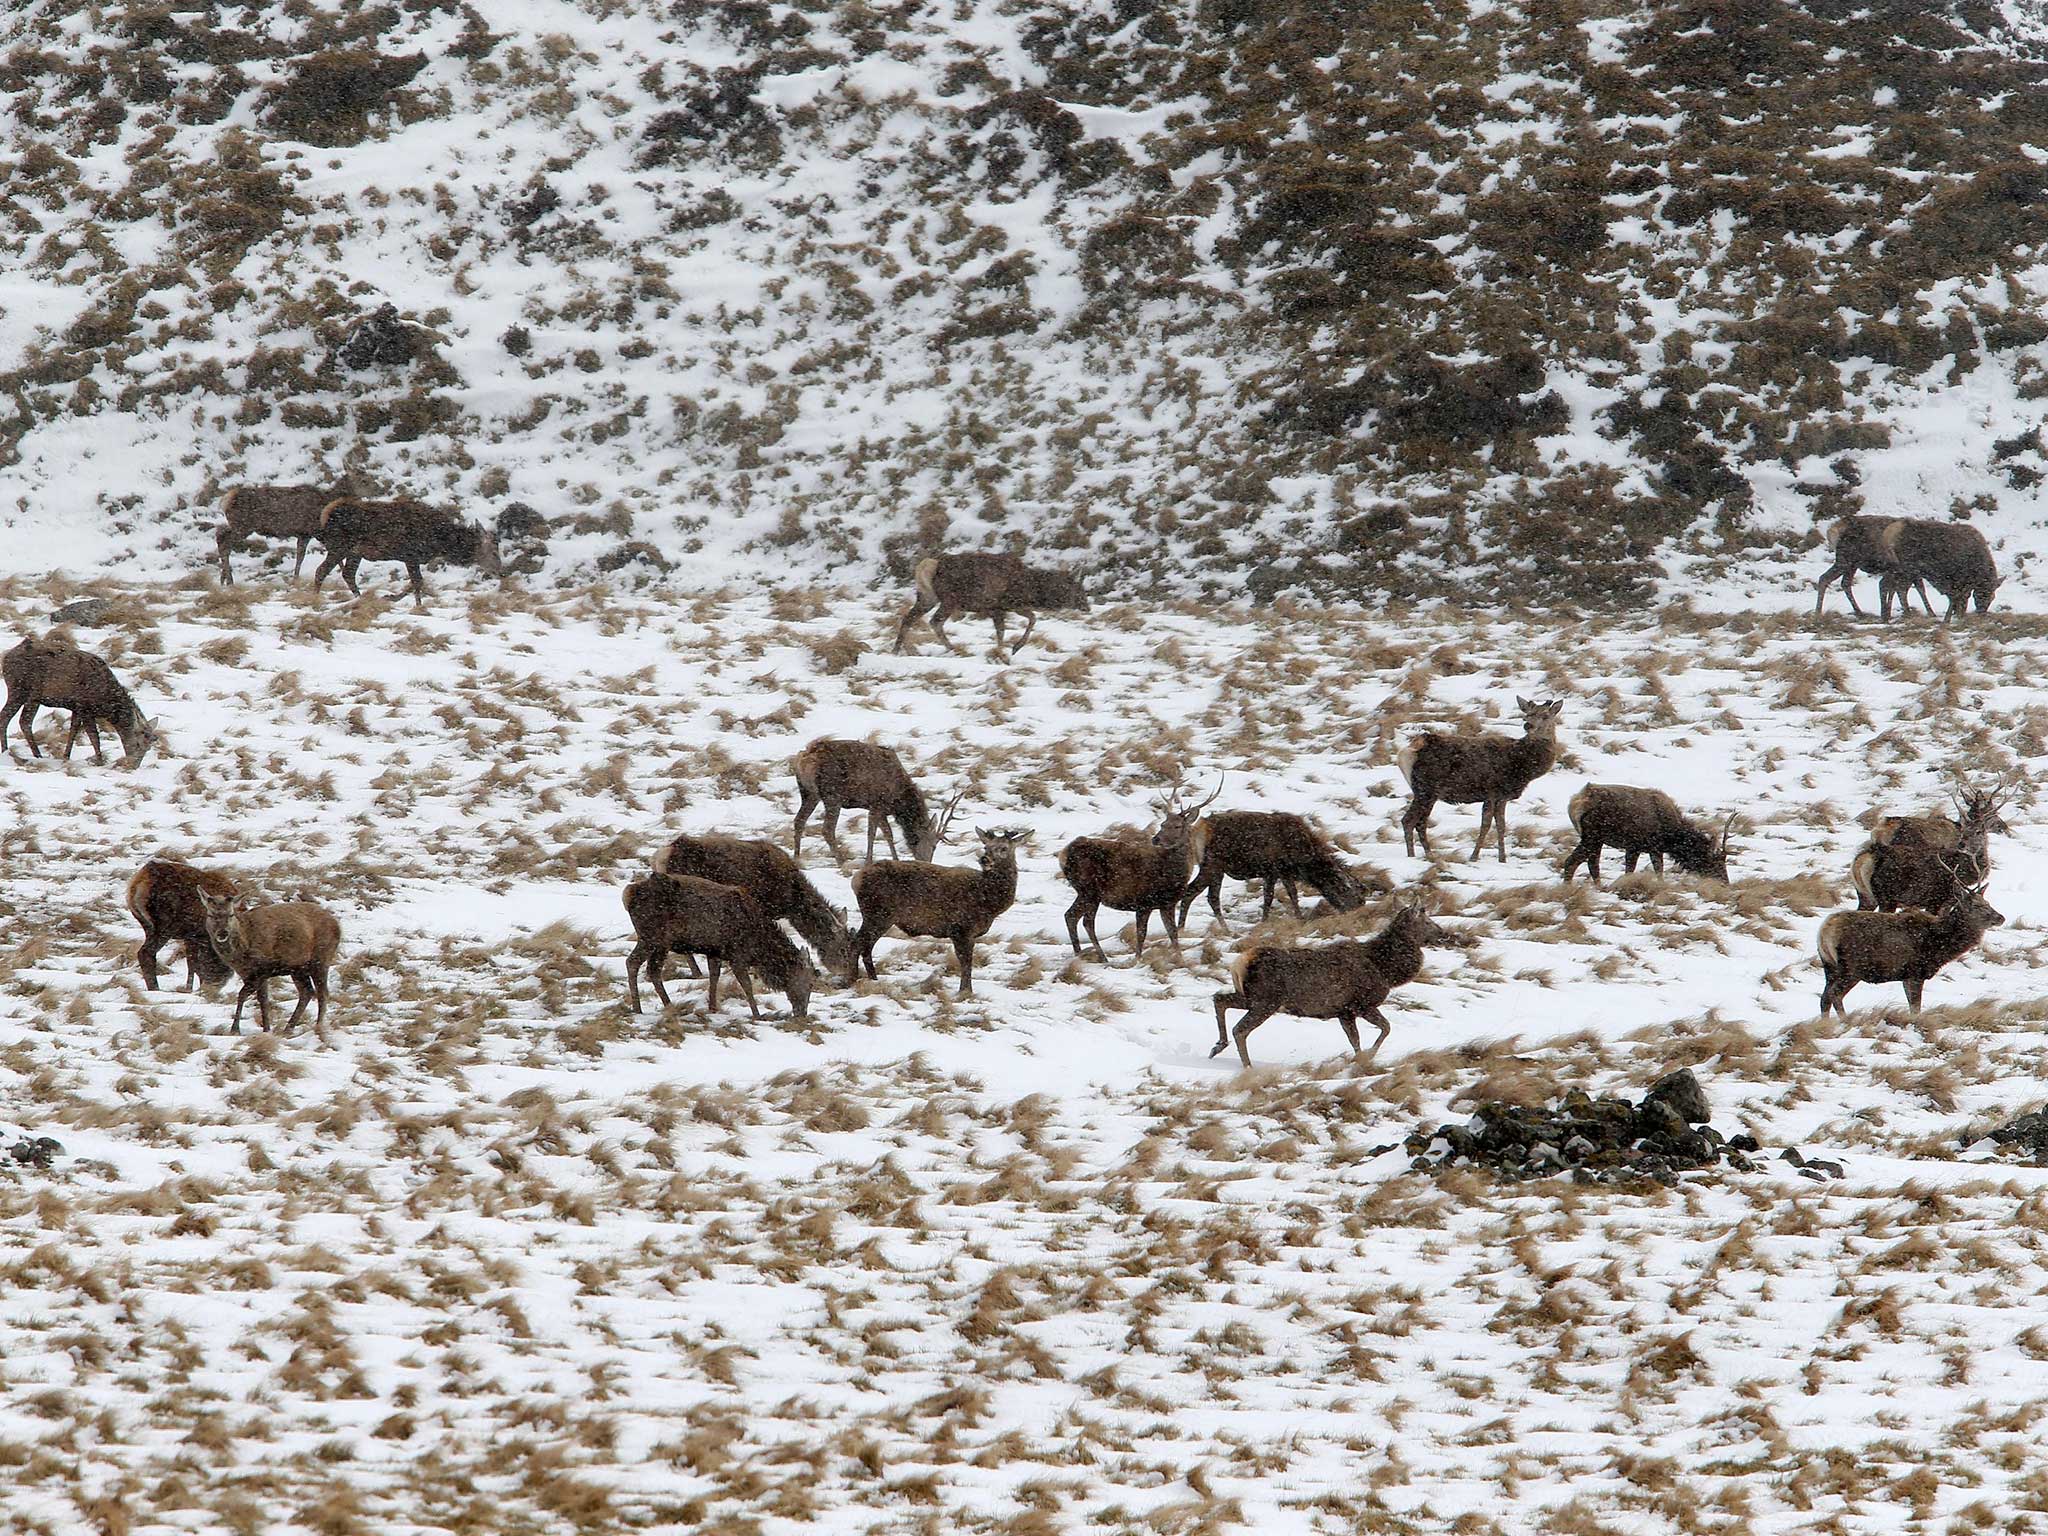 Deer make their way through the snow covered hills of Glenshee